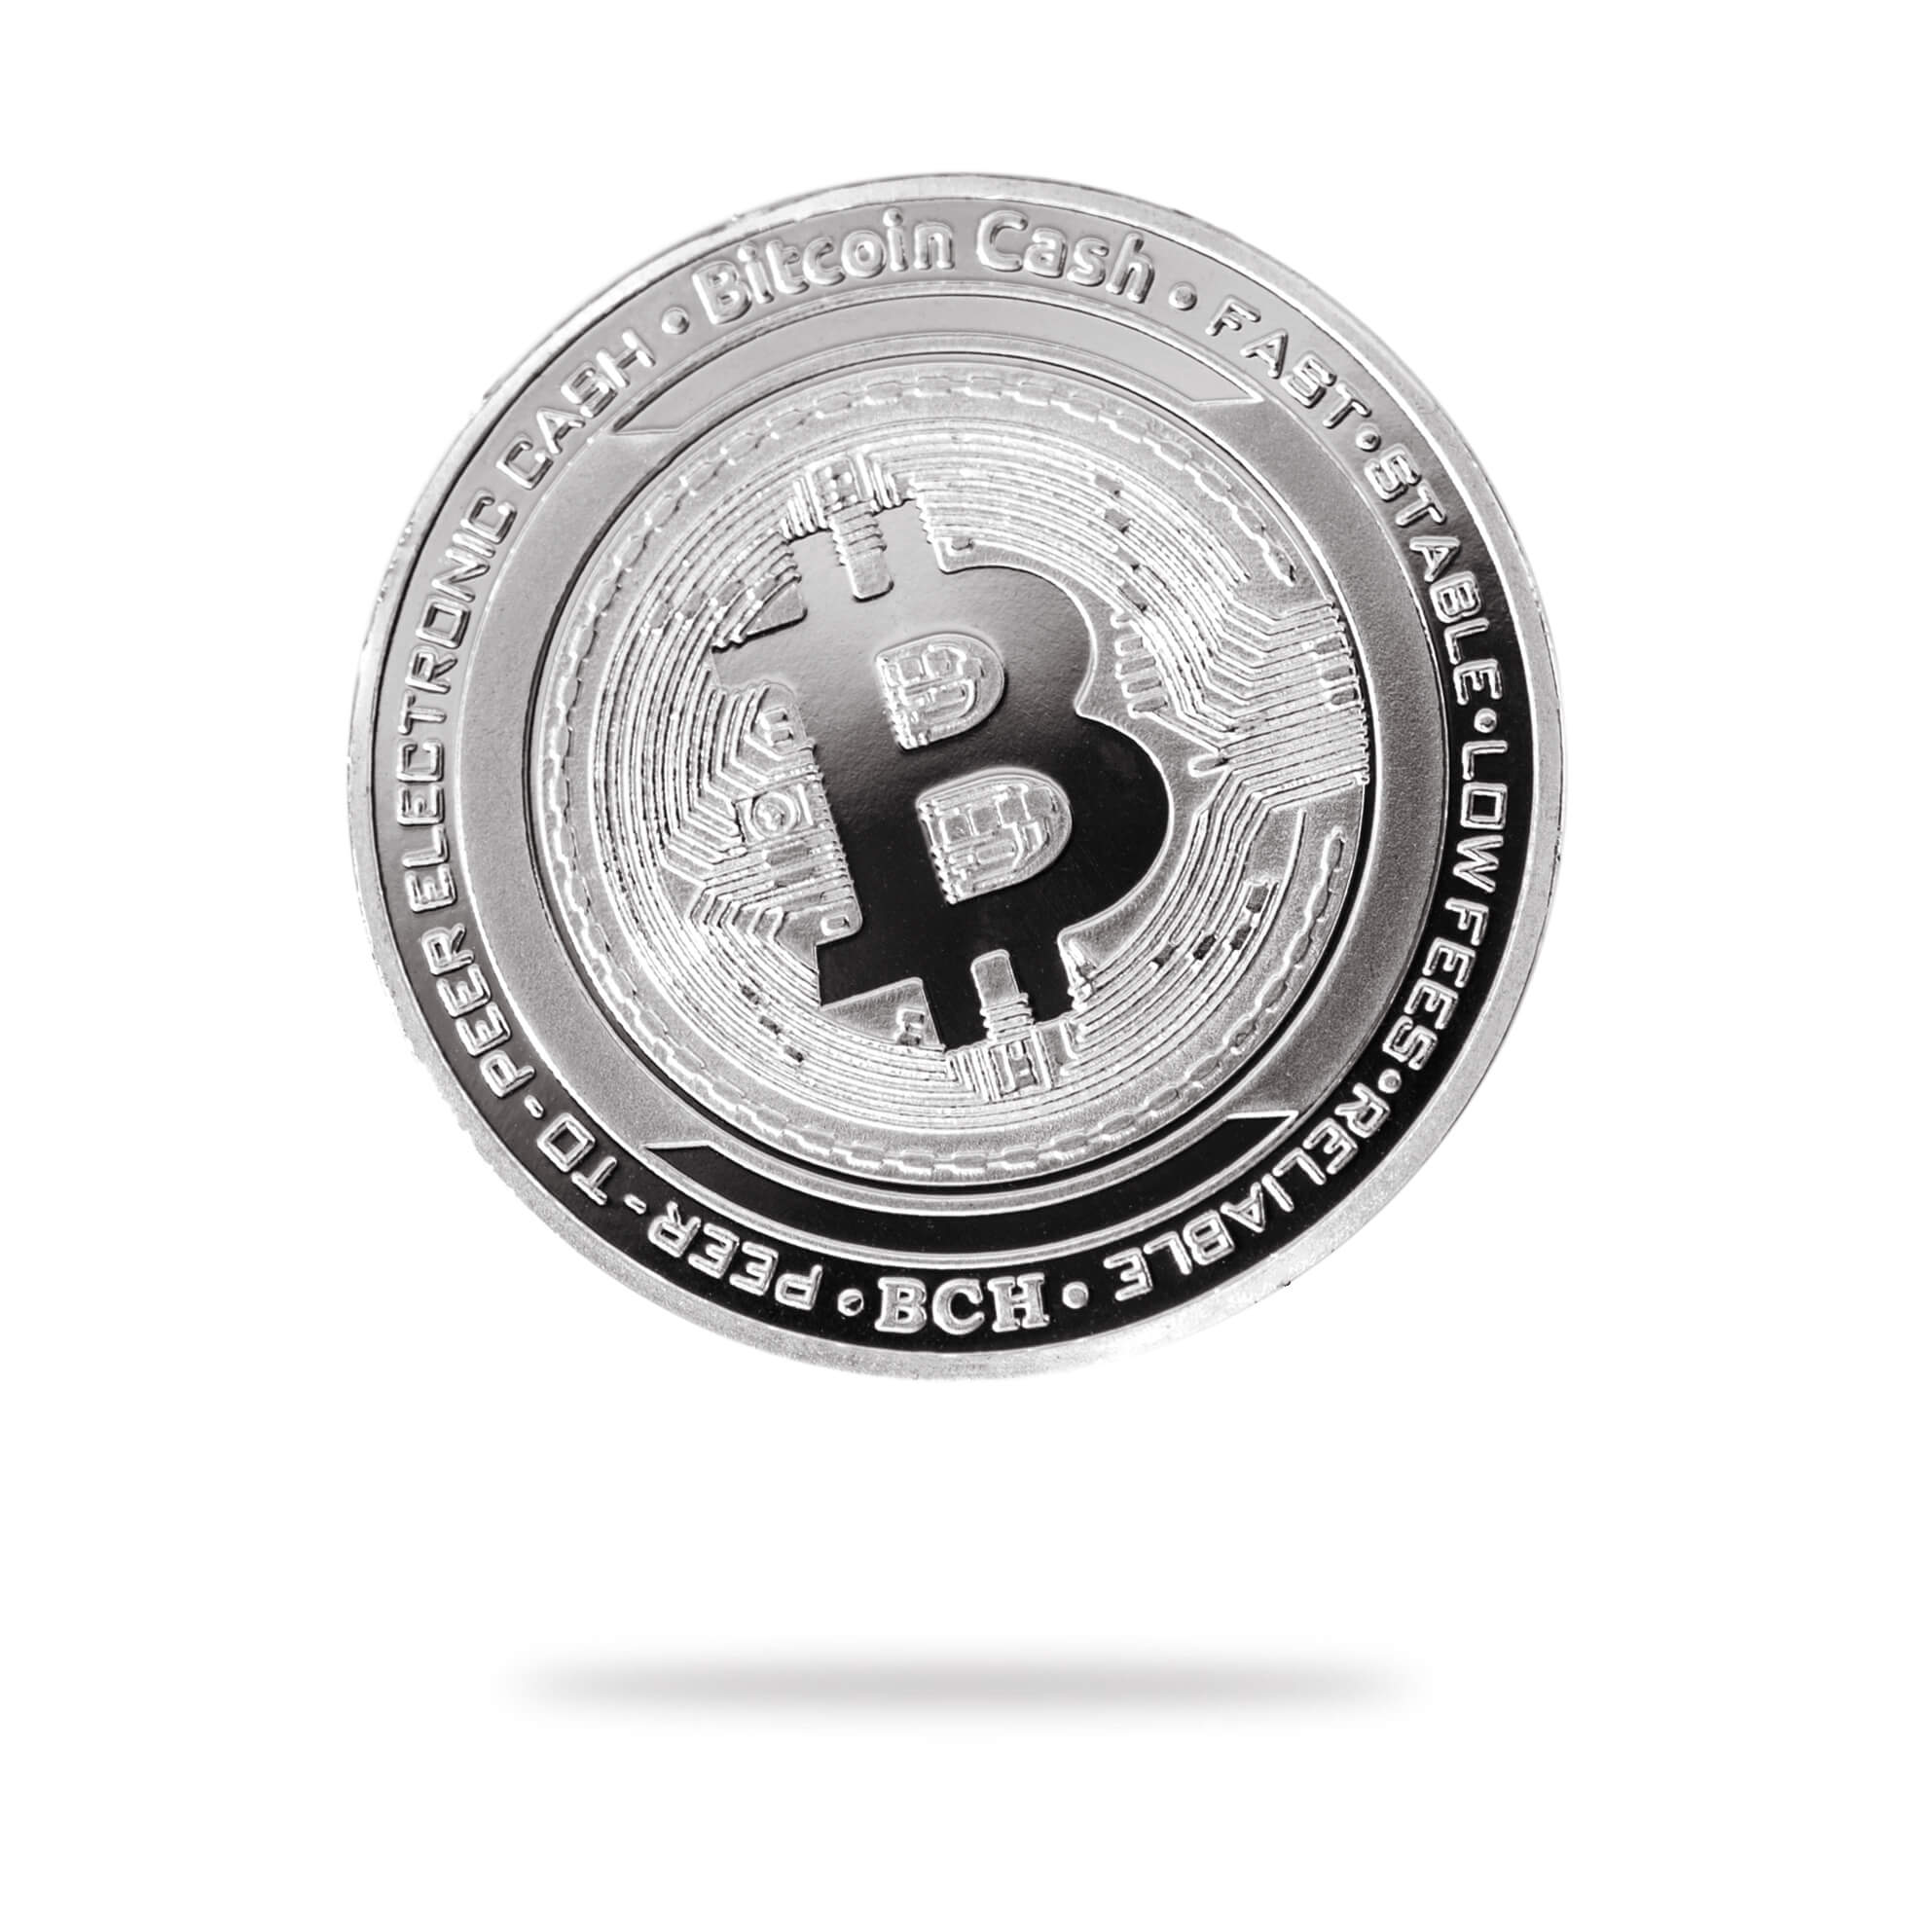 Cryptochips | Bitcoin Cash Physical Crypto Coin. Collectable cryptocurrency merch you can hodl